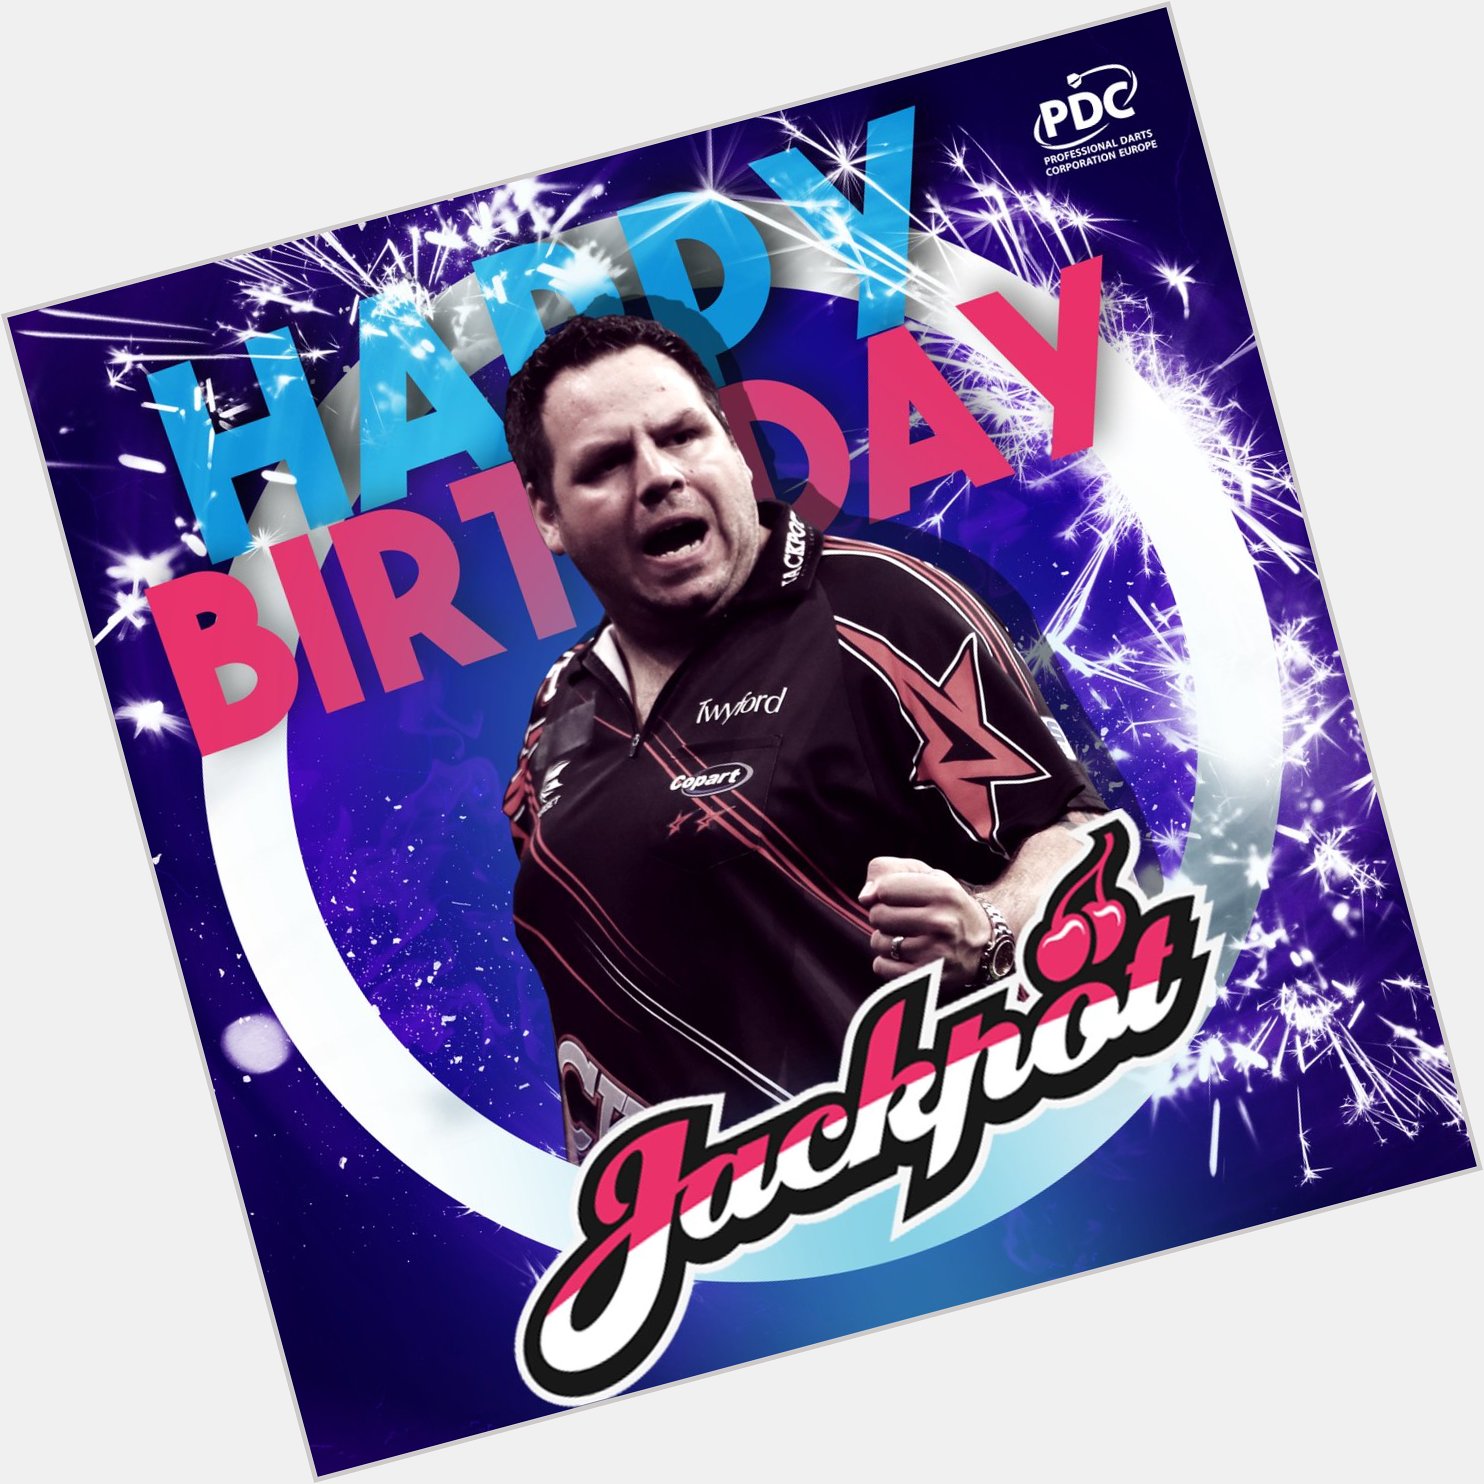 The two-time World Darts Champion turns 33 years today. Happy Birthday to Adrian Lewis!   